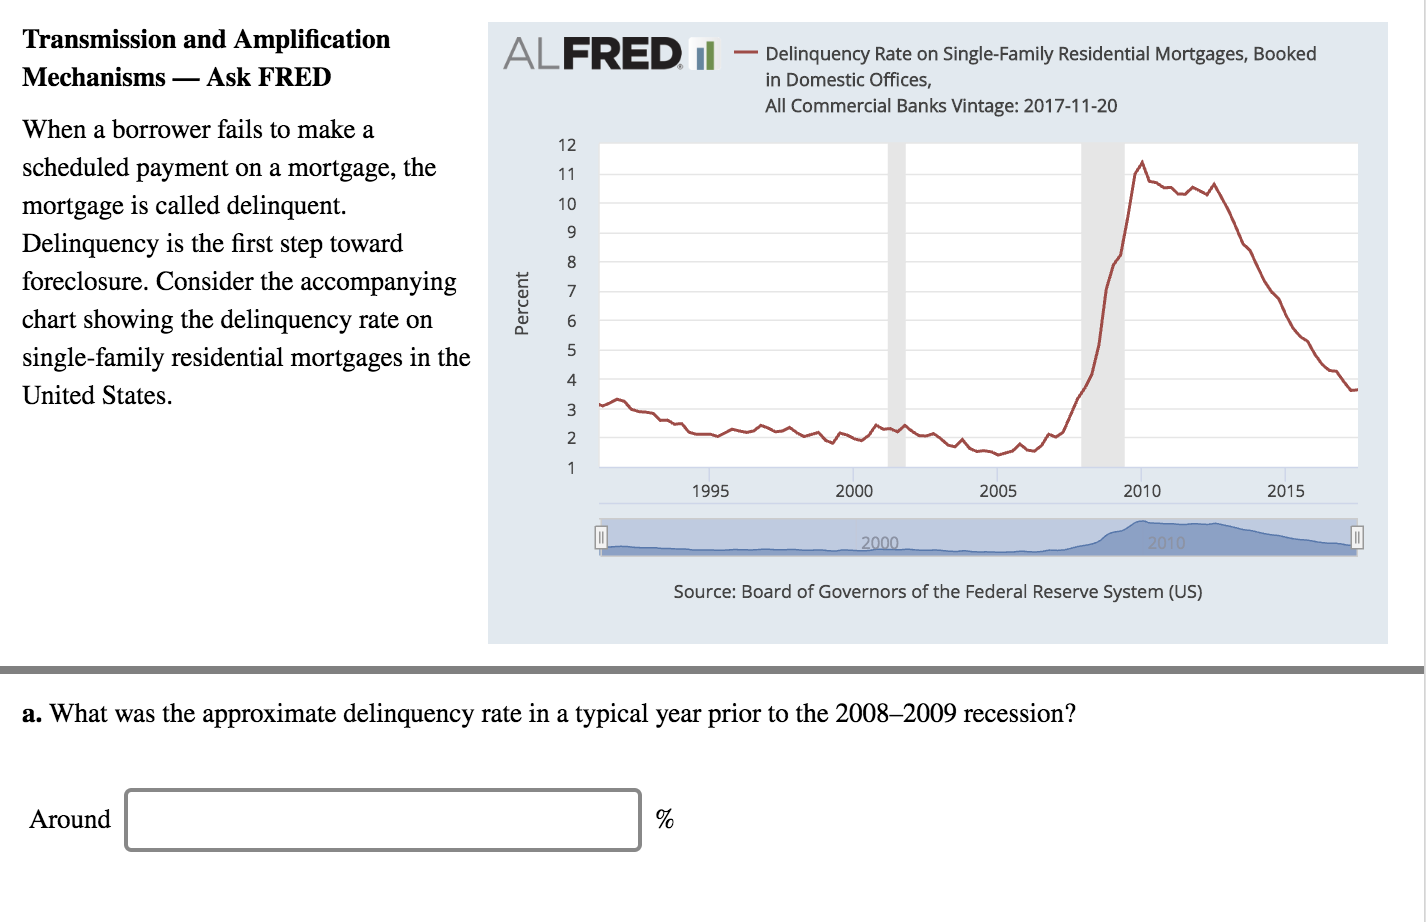 Transmission and Amplification
Mechanisms- Ask FRED
When a borrower fails to make a
scheduled payment on a mortgage, the
mortgage is called delinquent.
Delinquency is the first step toward
foreclosure. Consider the accompanying
chart showing the delinquency rate on
single-family residential mortgages in the
United States.
ALFRED
-Delinquency Rate on Single-Family Residential Mortgages, Booked
in Domestic Offices
All Commercial Banks Vintage: 2017-11-20
12
10
8
4
2
1995
2000
2005
2010
2015
Source: Board of Governors of the Federal Reserve System (US)
a. What was the approximate delinquency rate in a typical year prior to the 2008-2009 recession?
Around
